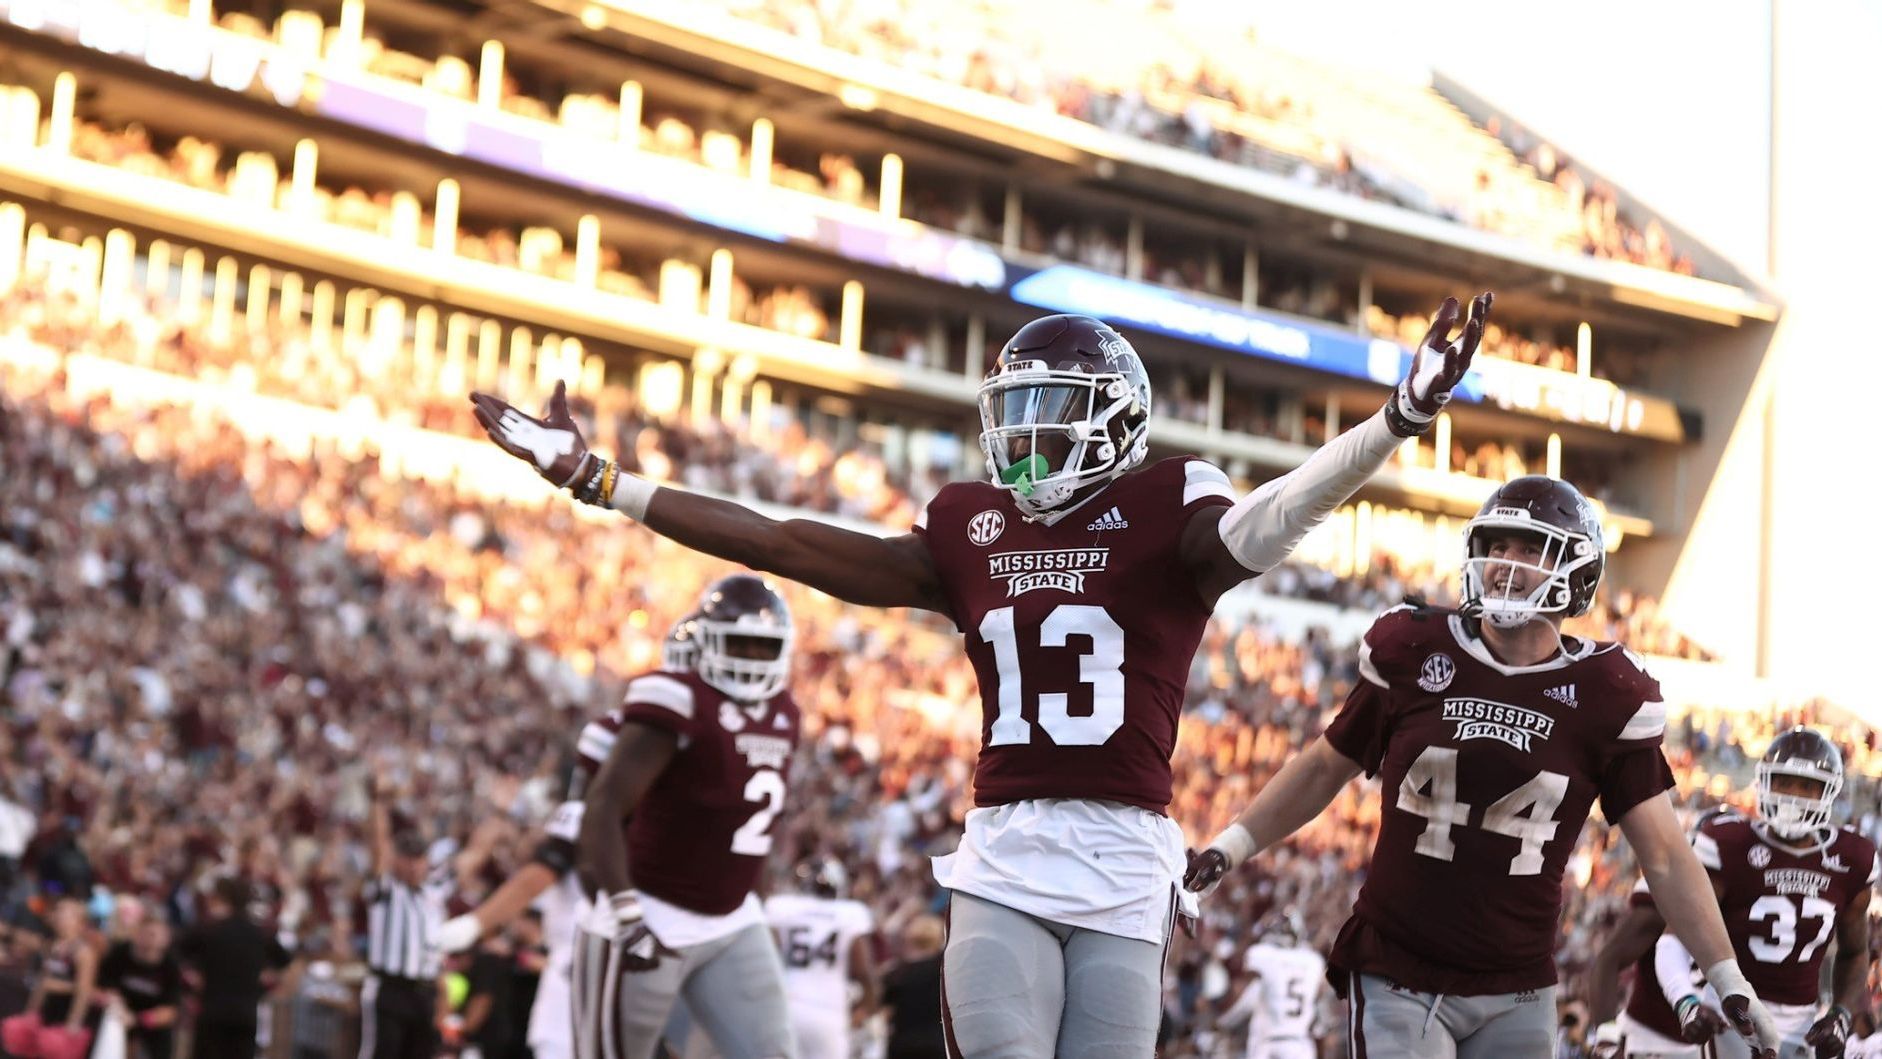 Forbes' pick-six seals MS State's upset win vs. Aggies